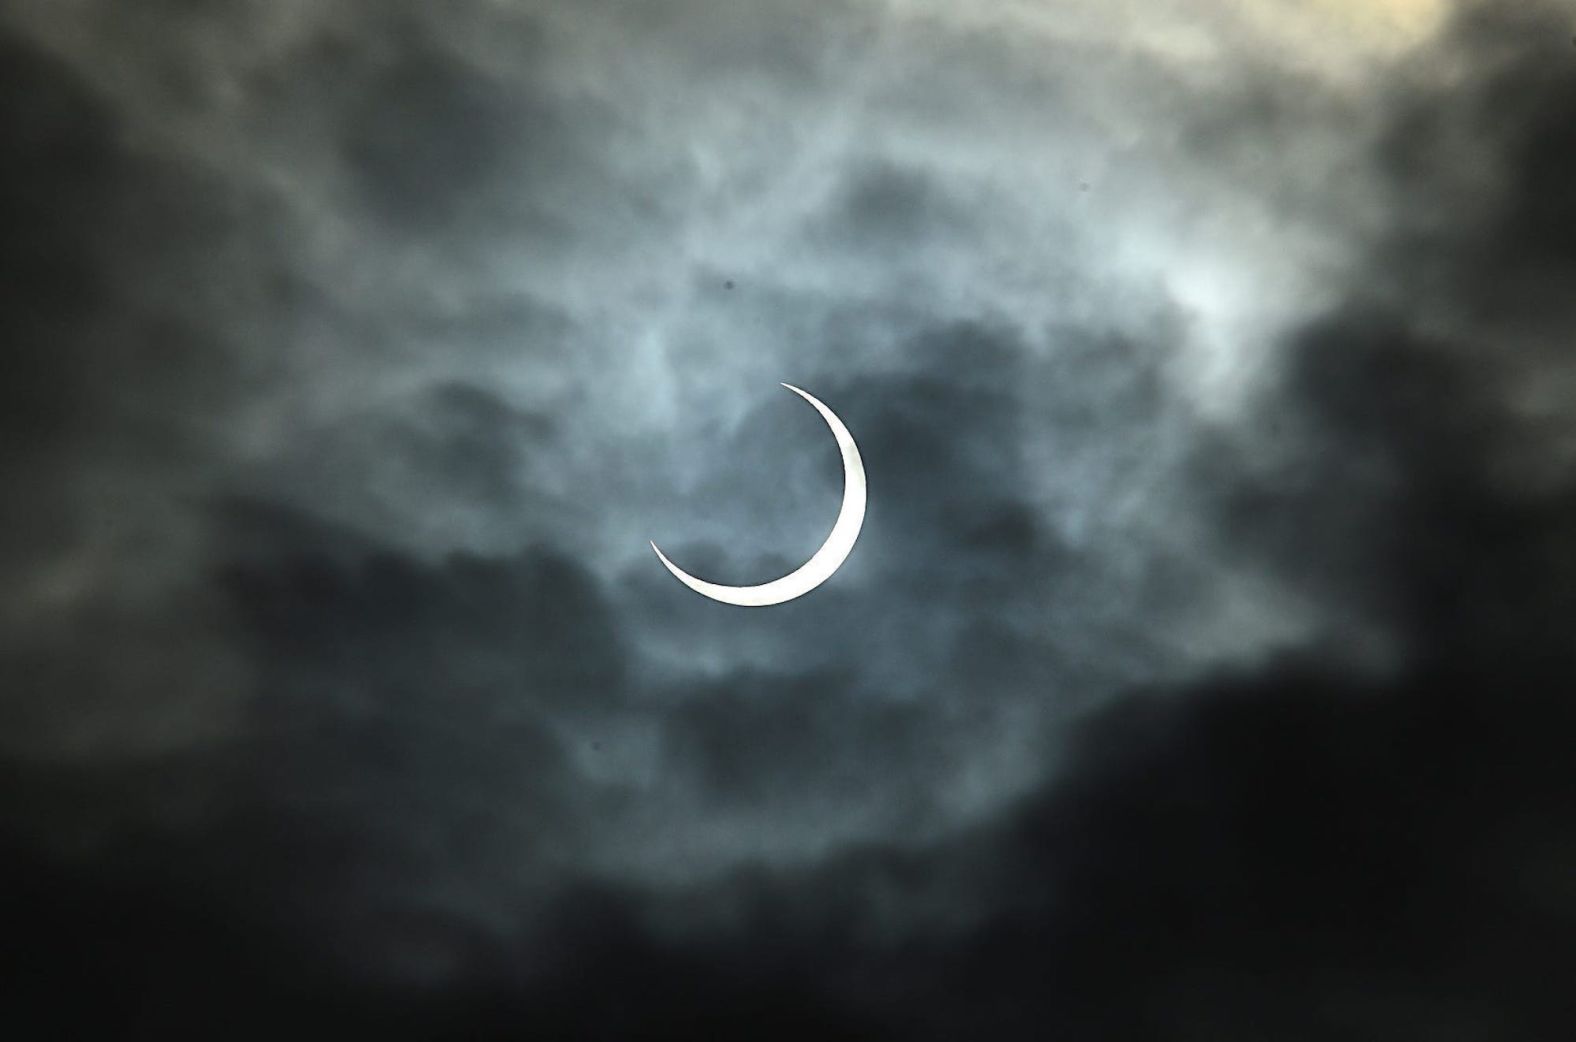 The eclipse pokes through the clouds during a watch party at the Fleischmann Planetarium in Reno, Nevada.